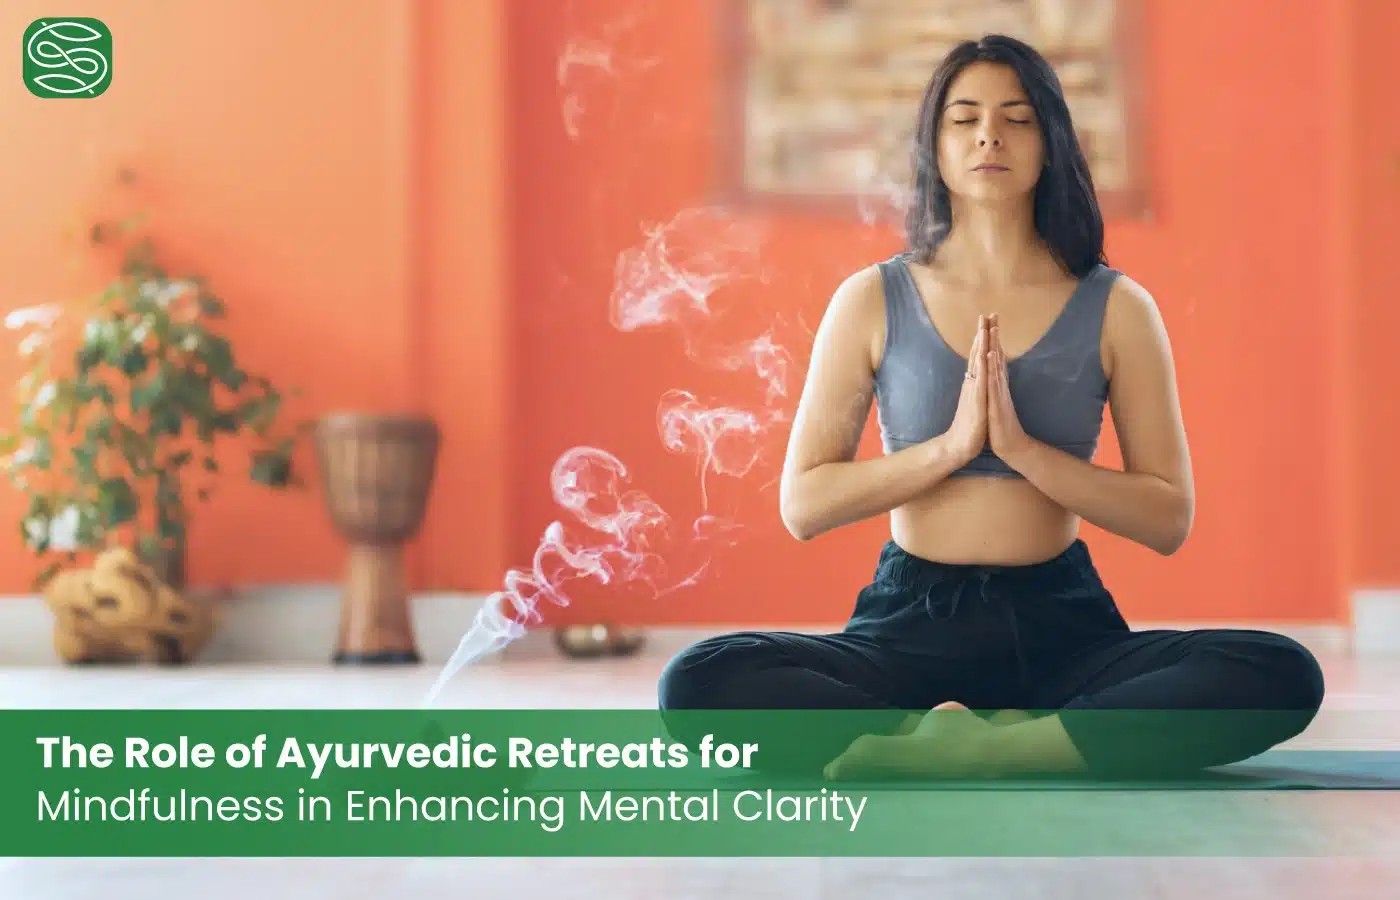 The Role of Ayurvedic Retreats for Mindfulness in Enhancing Mental Clarity